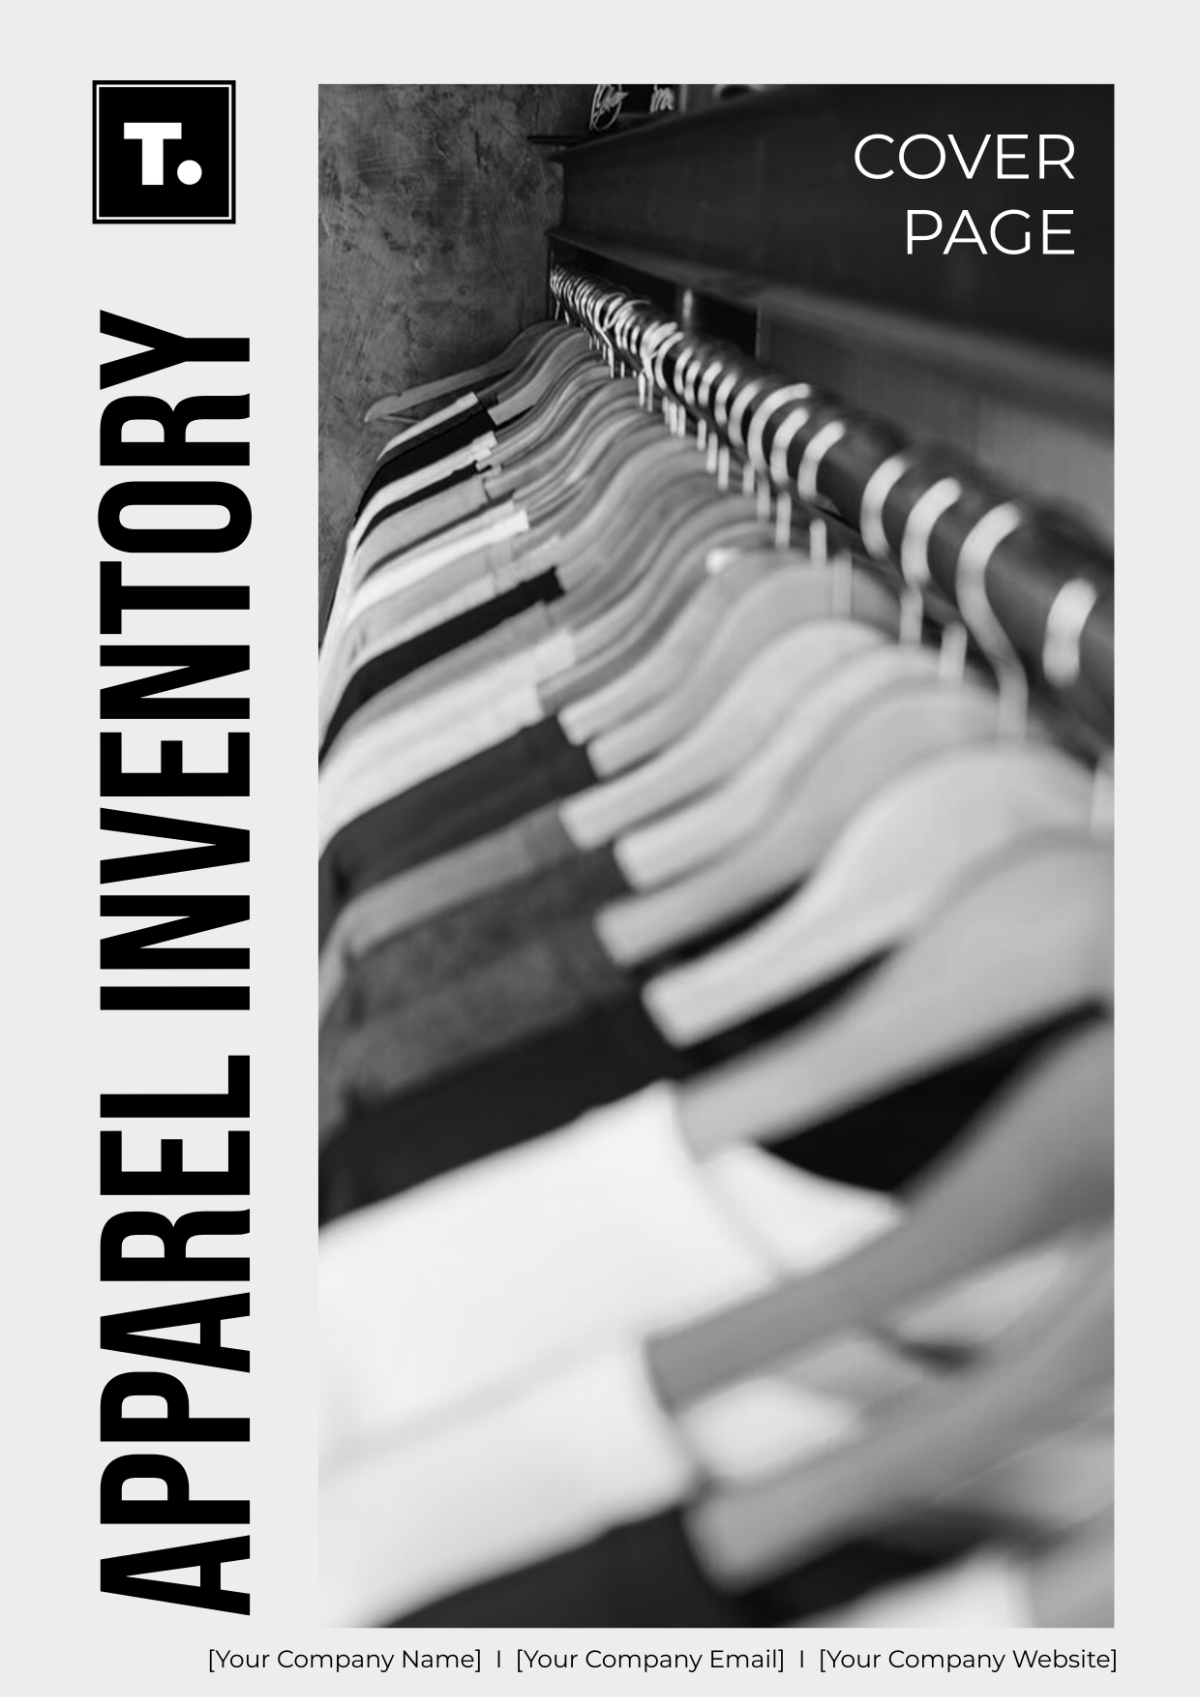 Apparel Inventory Cover Page